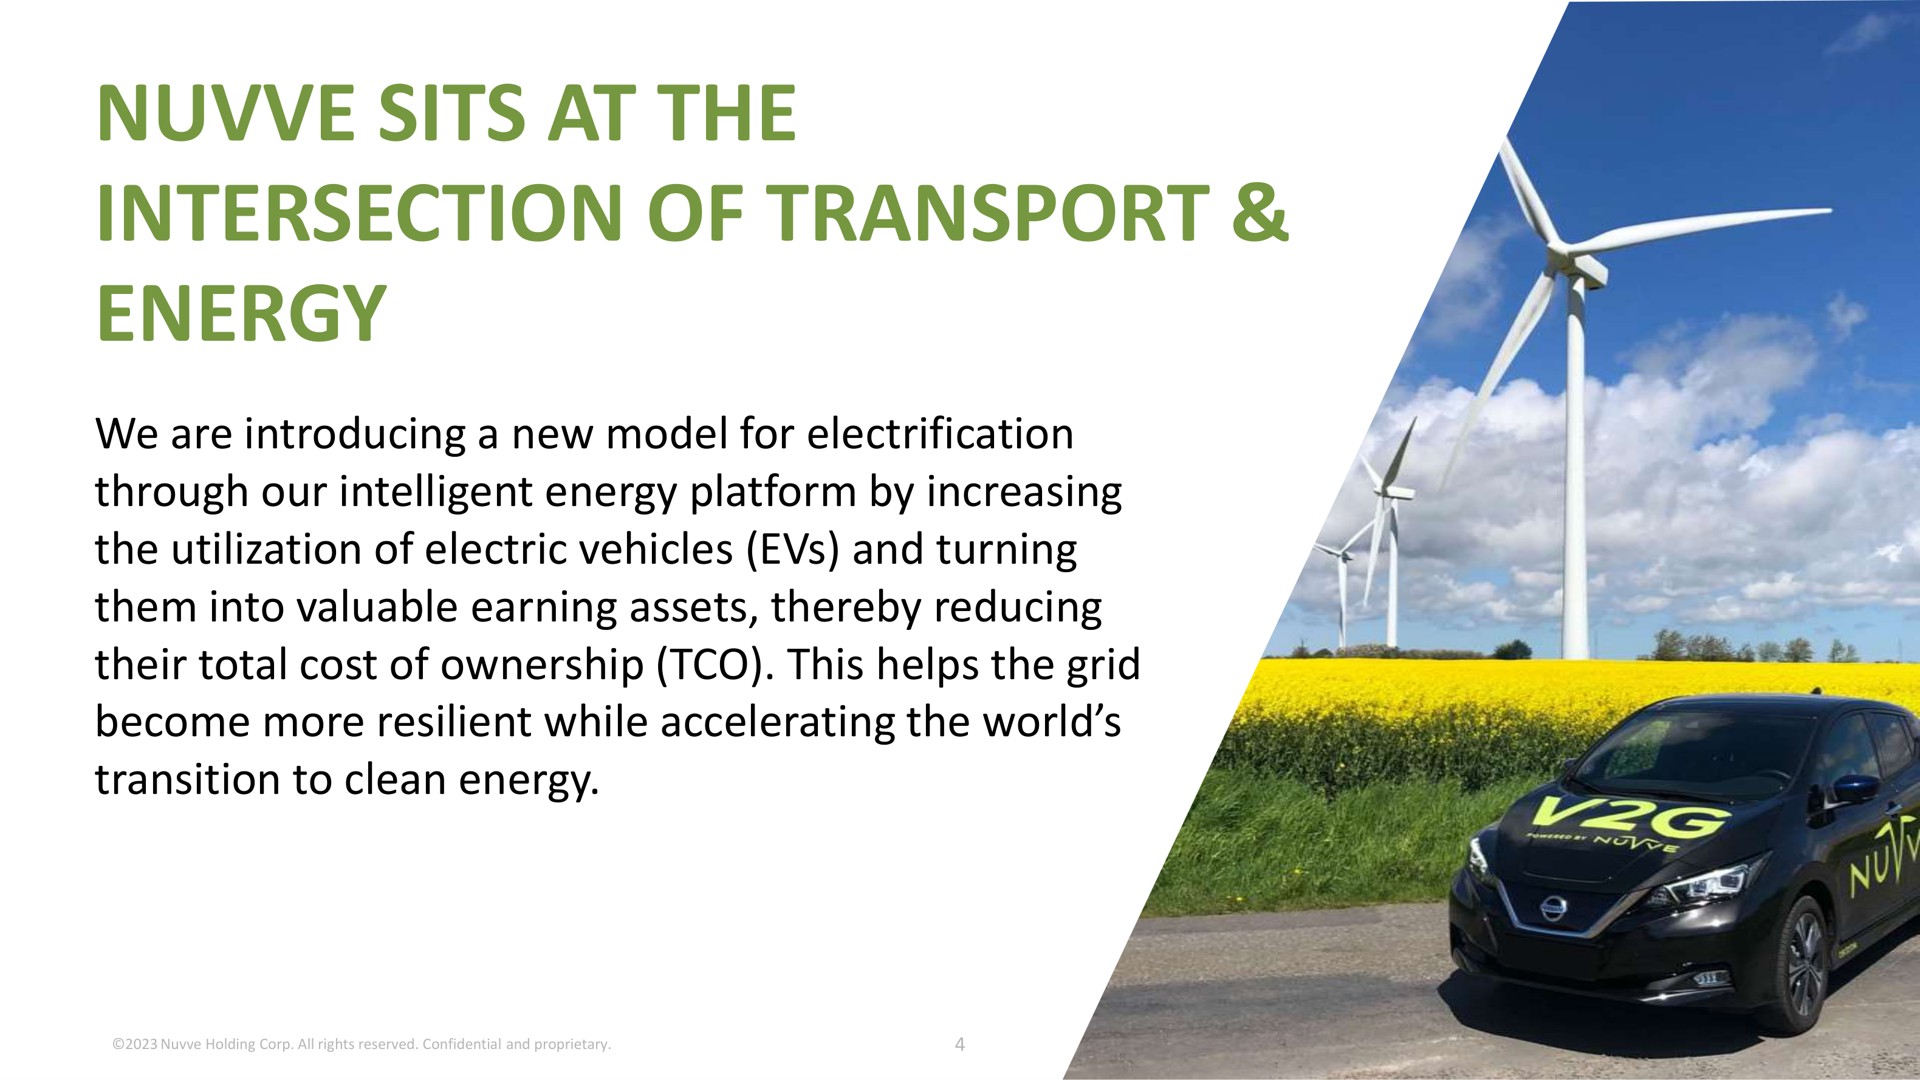 sits at the intersection of transport energy we are introducing a new model for electrification through our intelligent platform by increasing utilization electric vehicles and turning them into valuable earning assets thereby reducing their total cost ownership this helps grid become more resilient while accelerating world | Nuvve